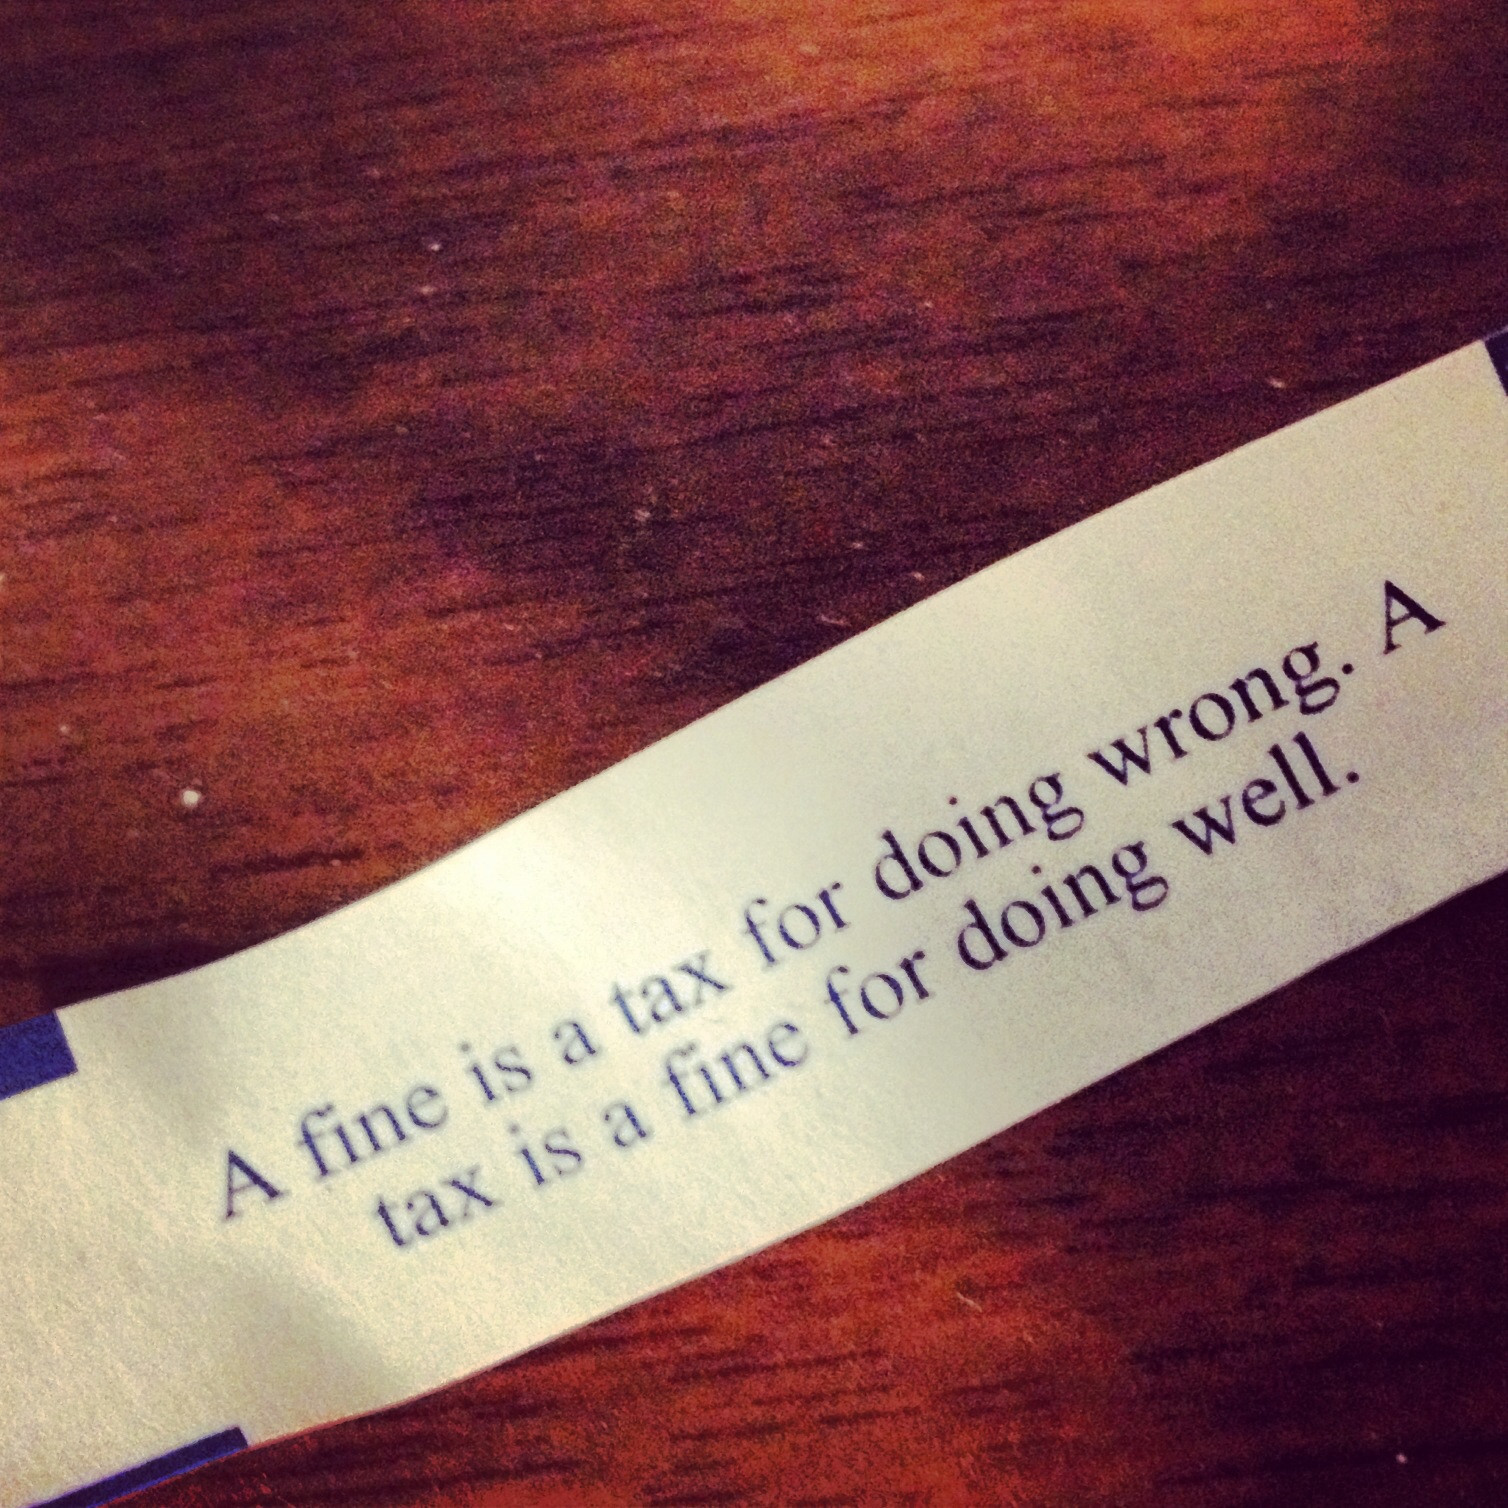 This fortune cookie has been endorsed by the GOP...